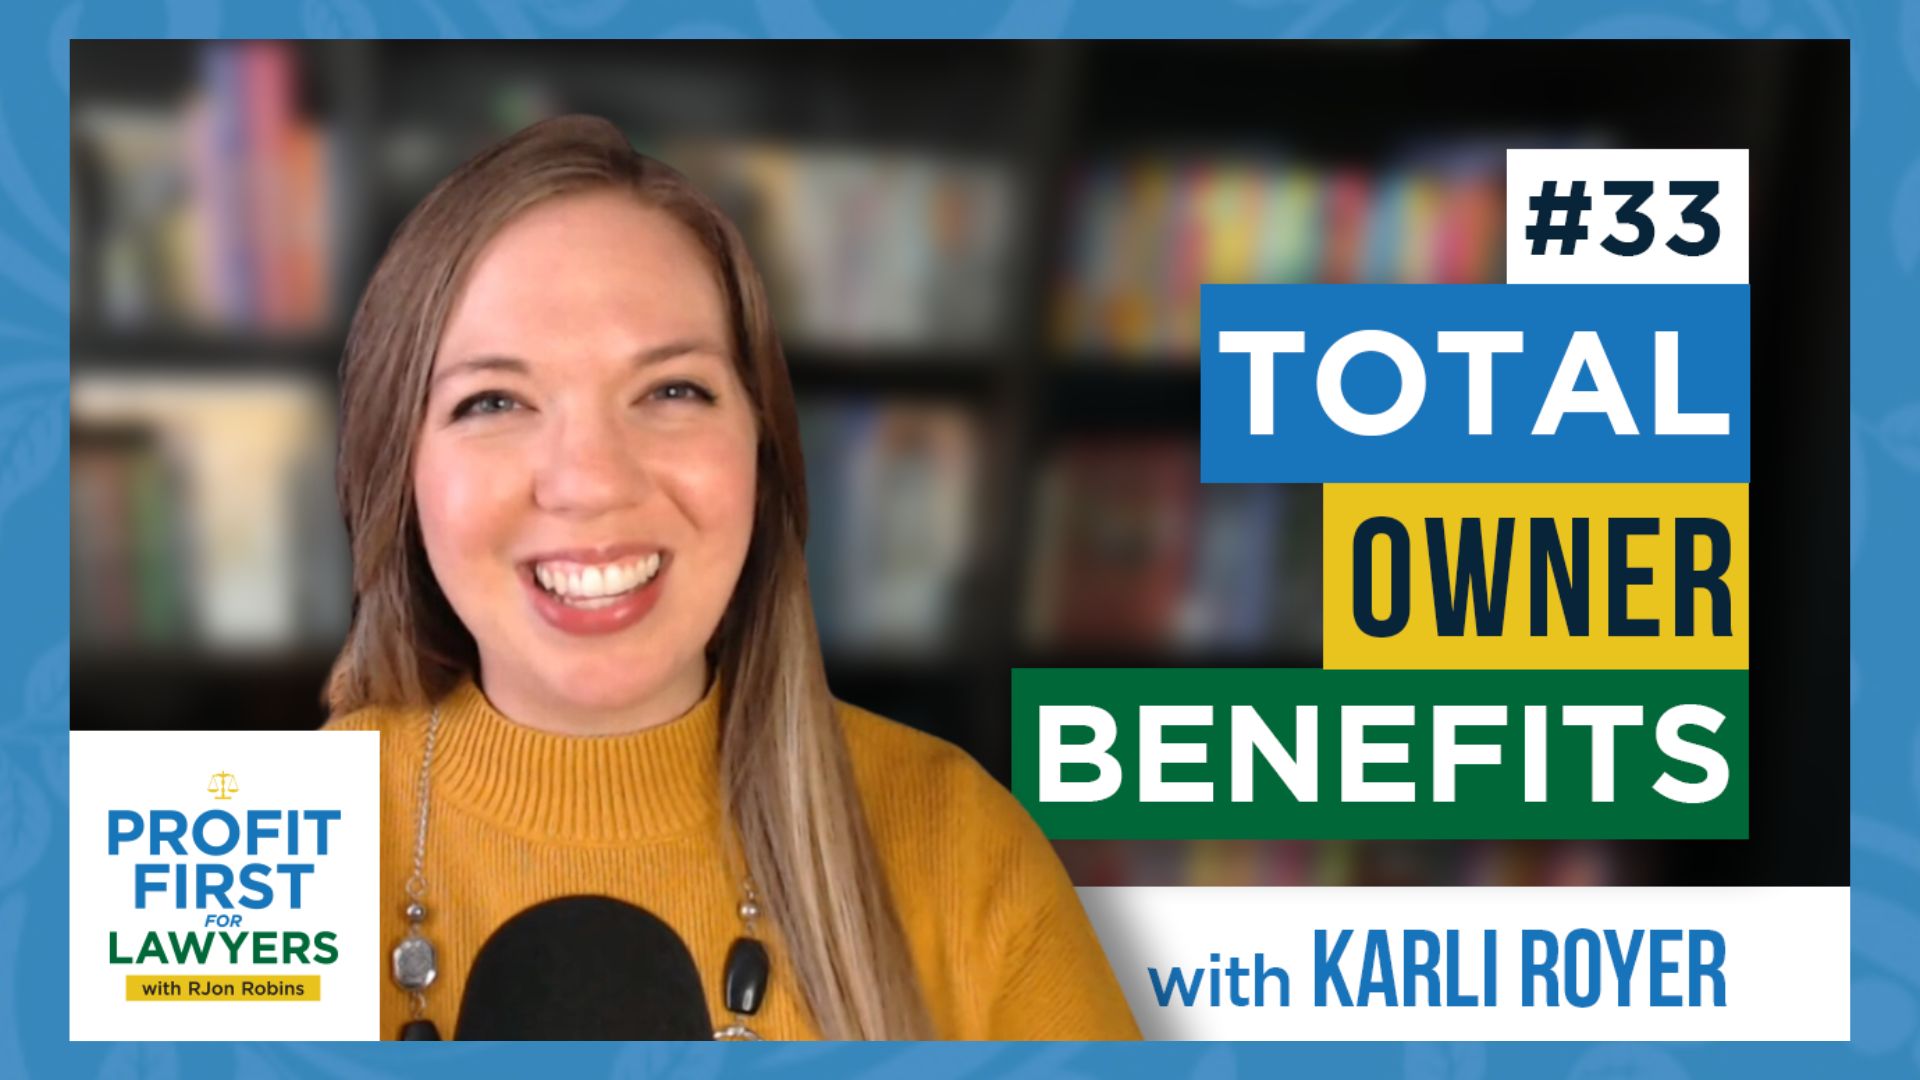 Profit First For Lawyers Episode 33 Total Owner Benefits featured image with Karli Royer. Karli is smiling sitting in front of a book shelf.